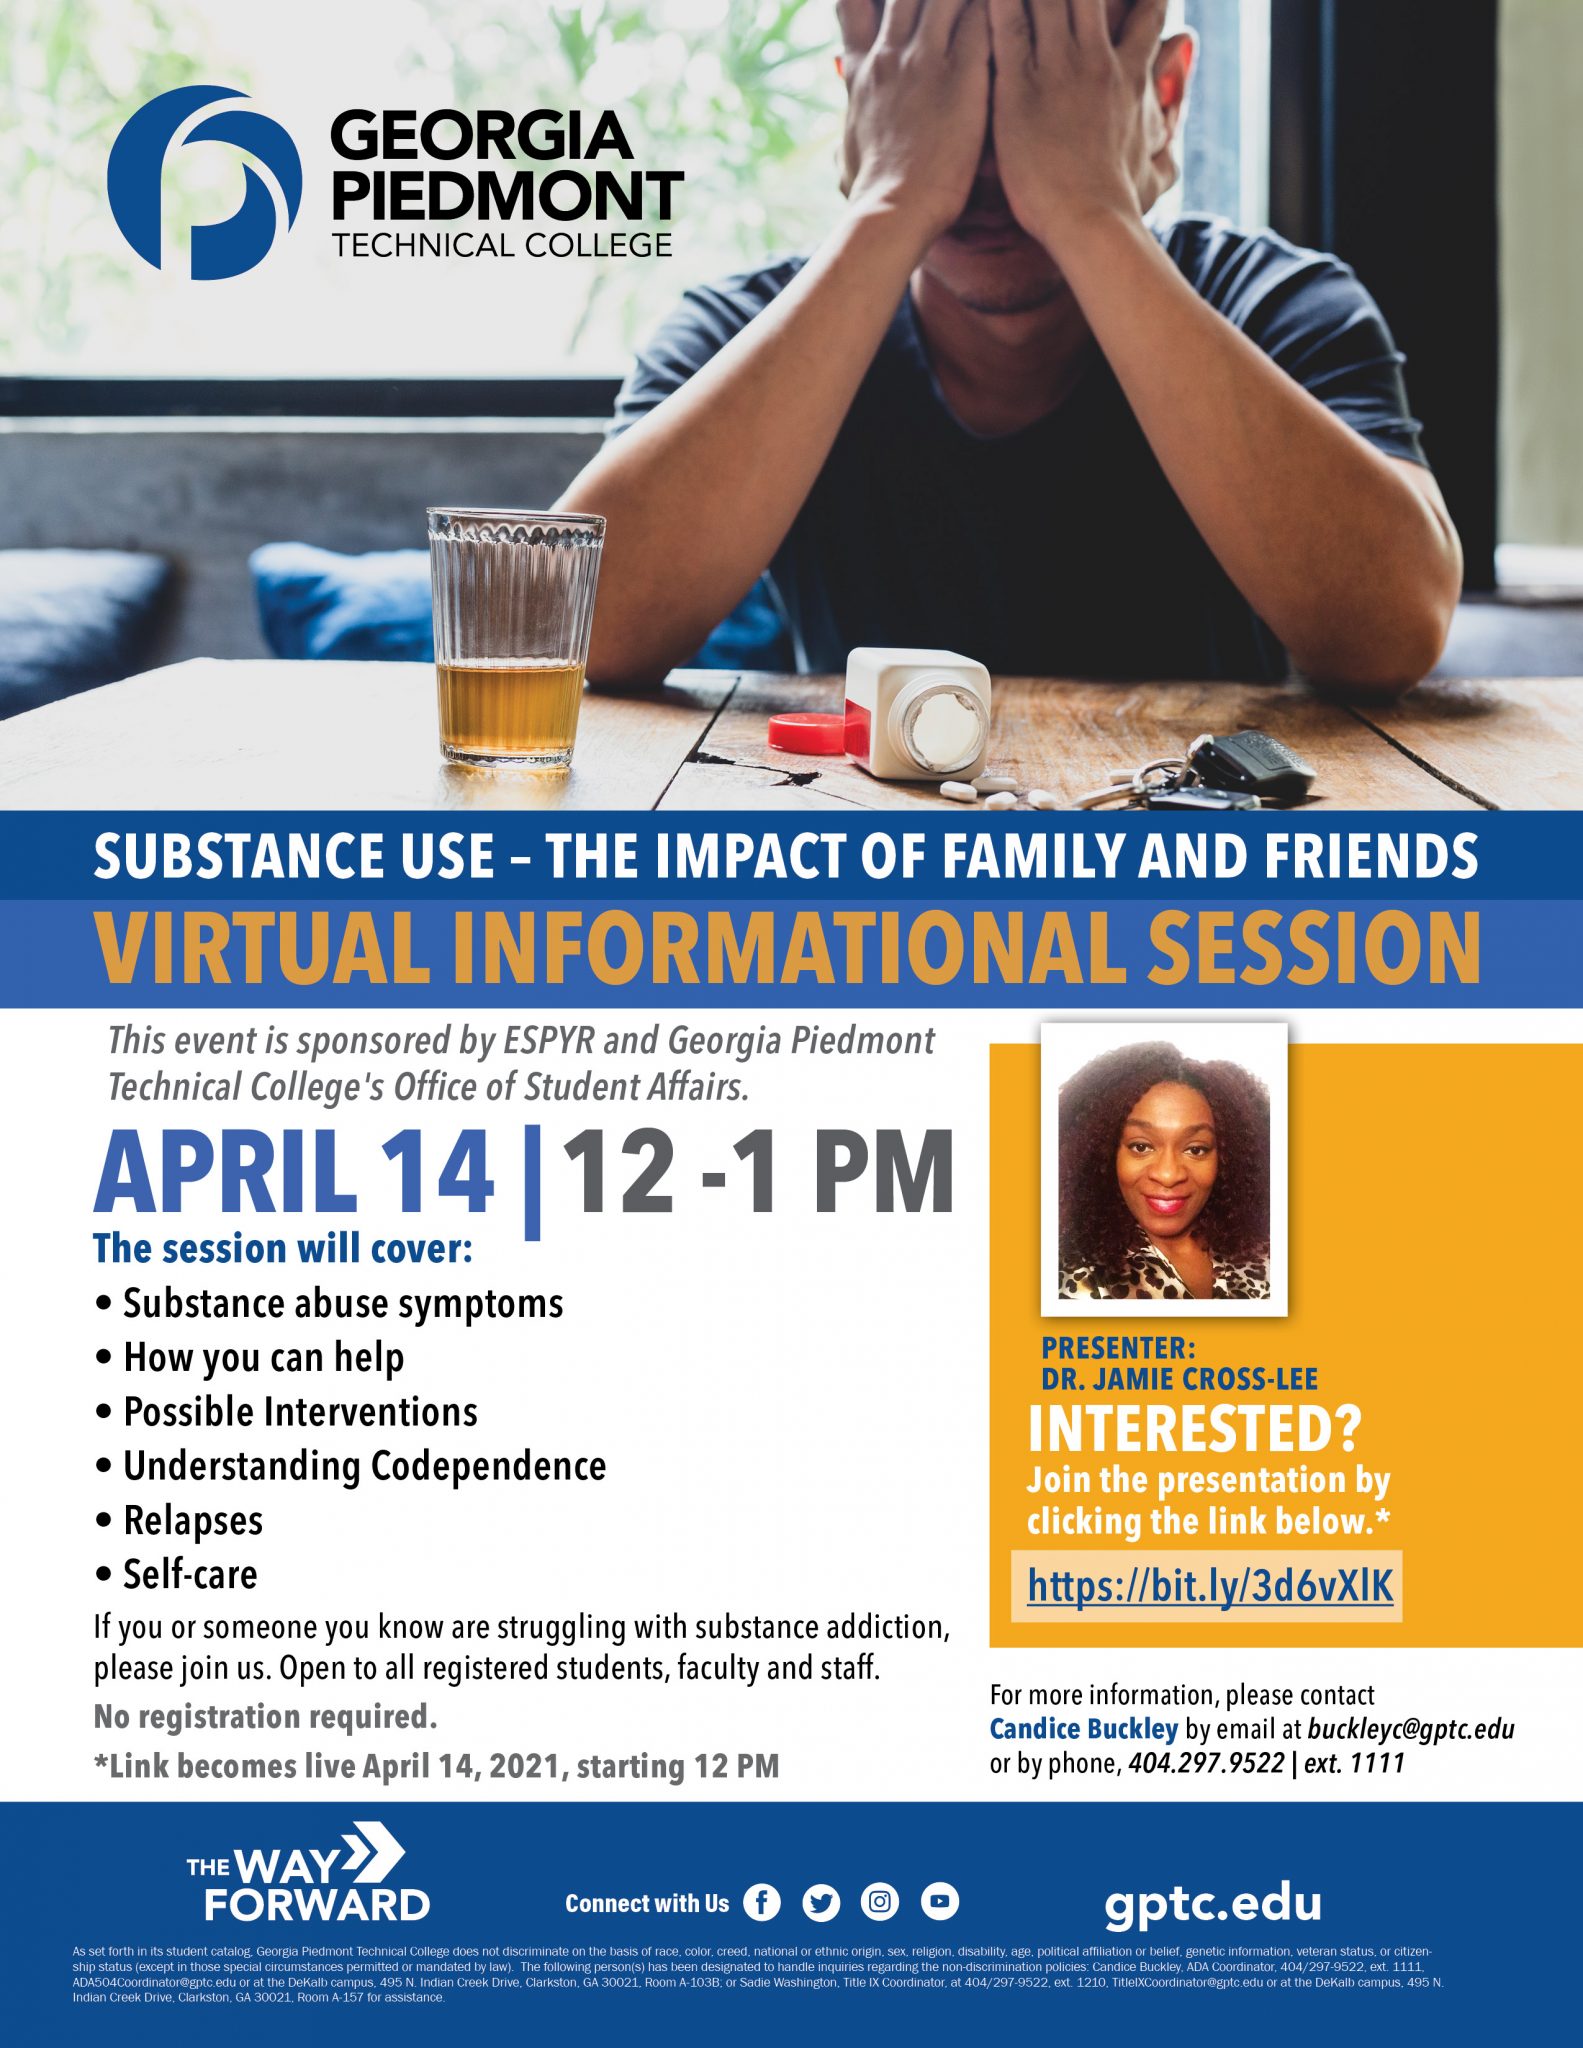 Free Webinar “Substance Abuse The Impact on Family and Friends